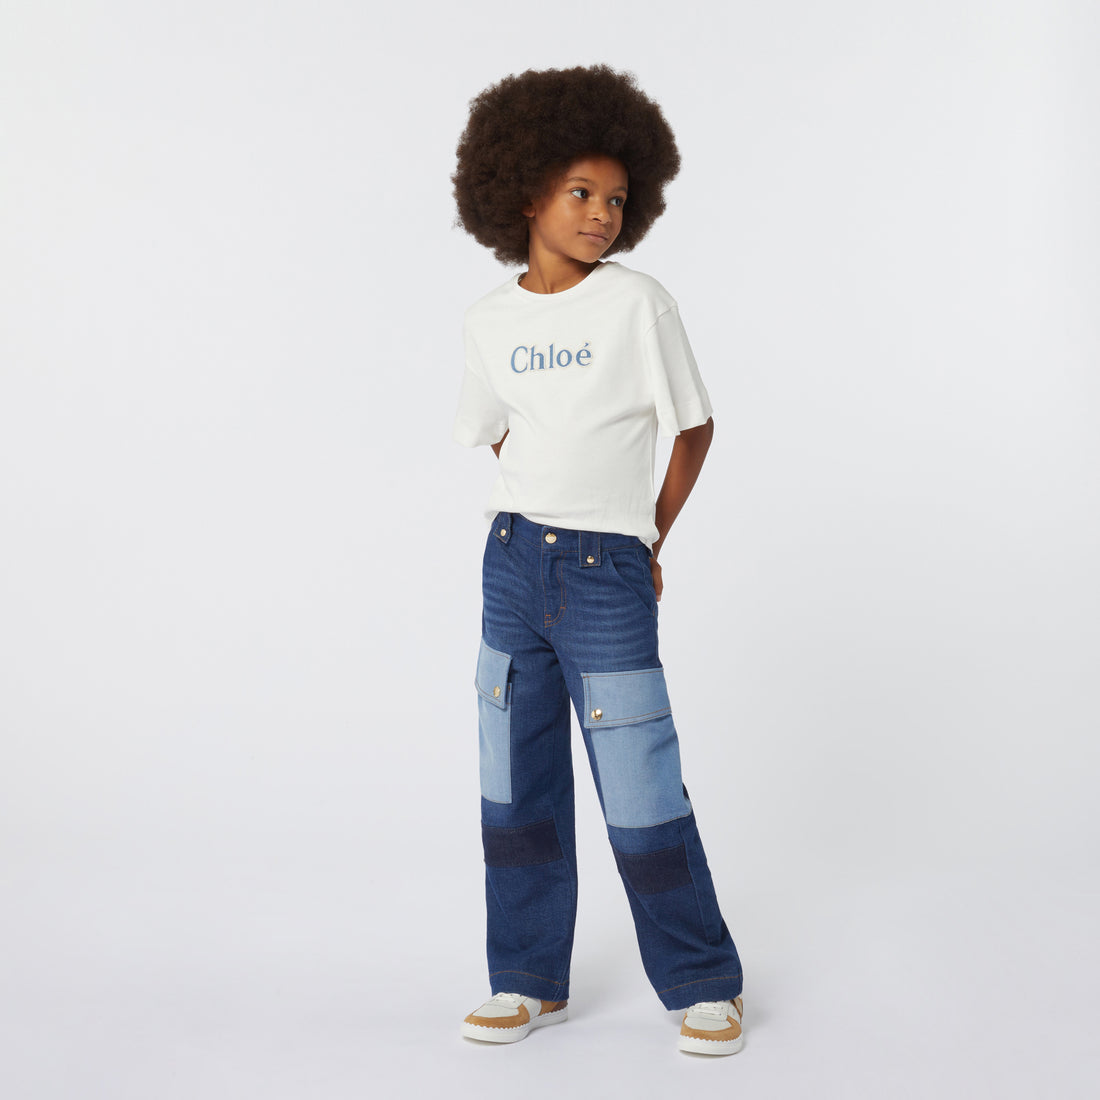 Chloe Short Sleeves Tee-Shirt Offwhite - 100% Cotton Kids Top | Schools Out